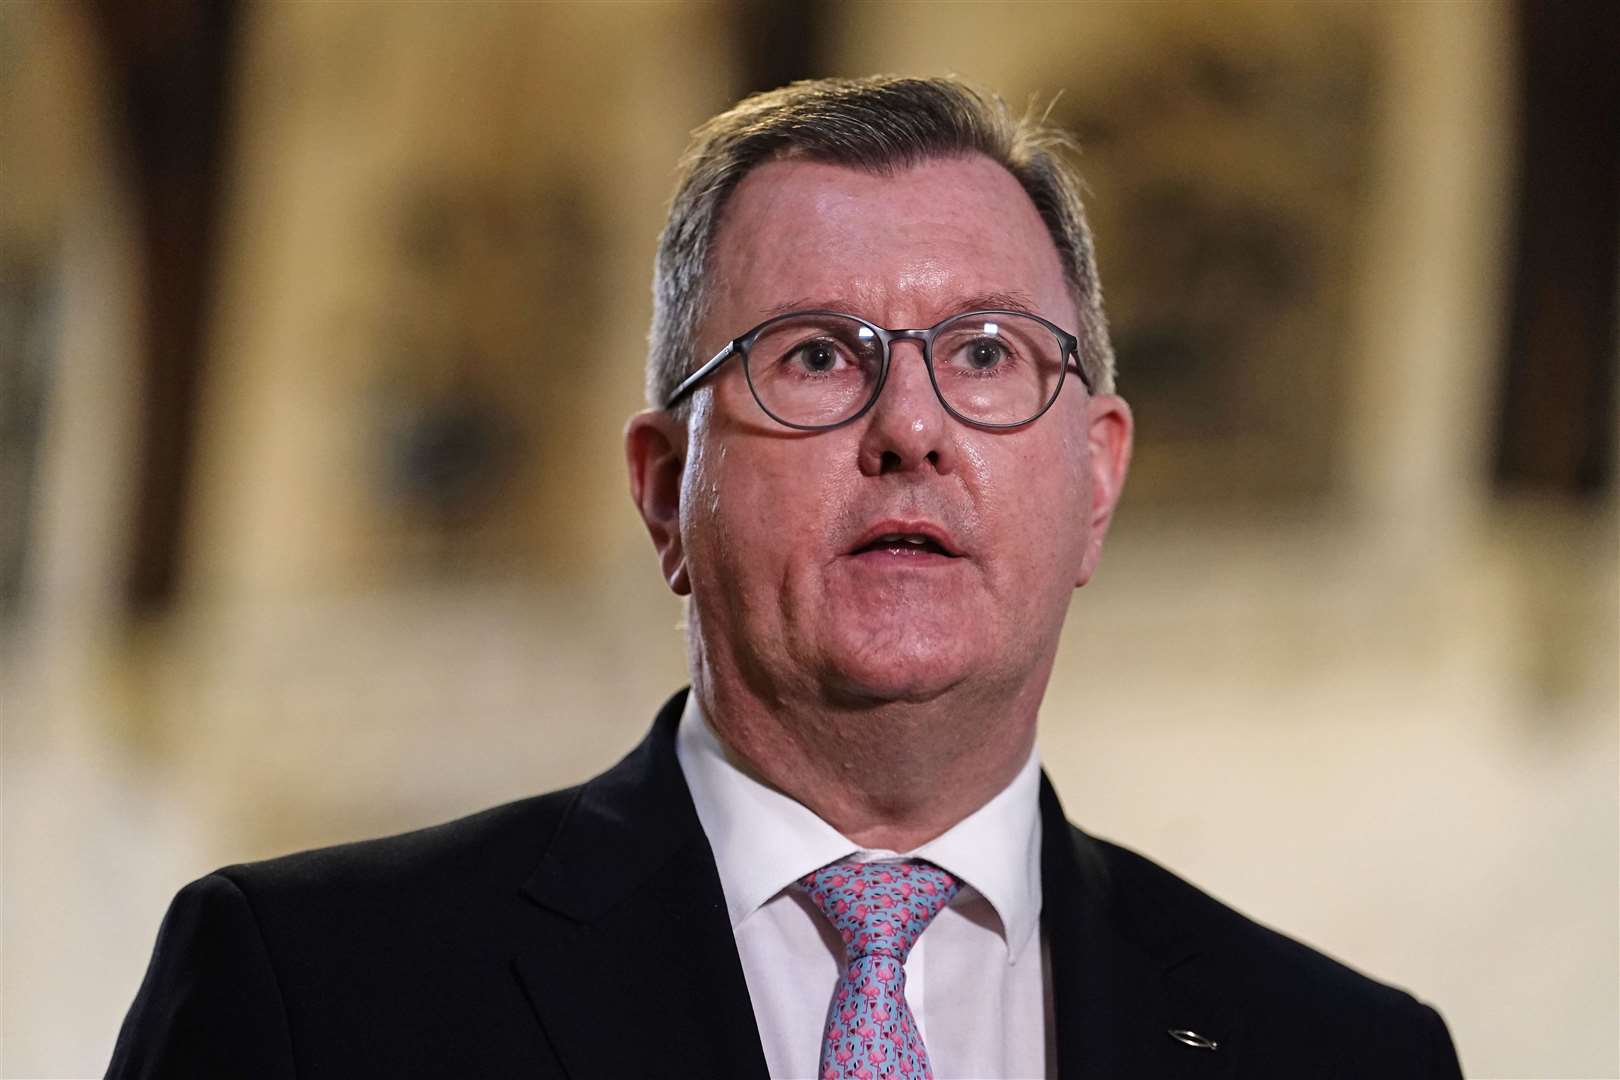 DUP leader Sir Jeffrey Donaldson said his party would take time and space before reaching a position on the Windsor Framework (Jordan Pettitt/PA)